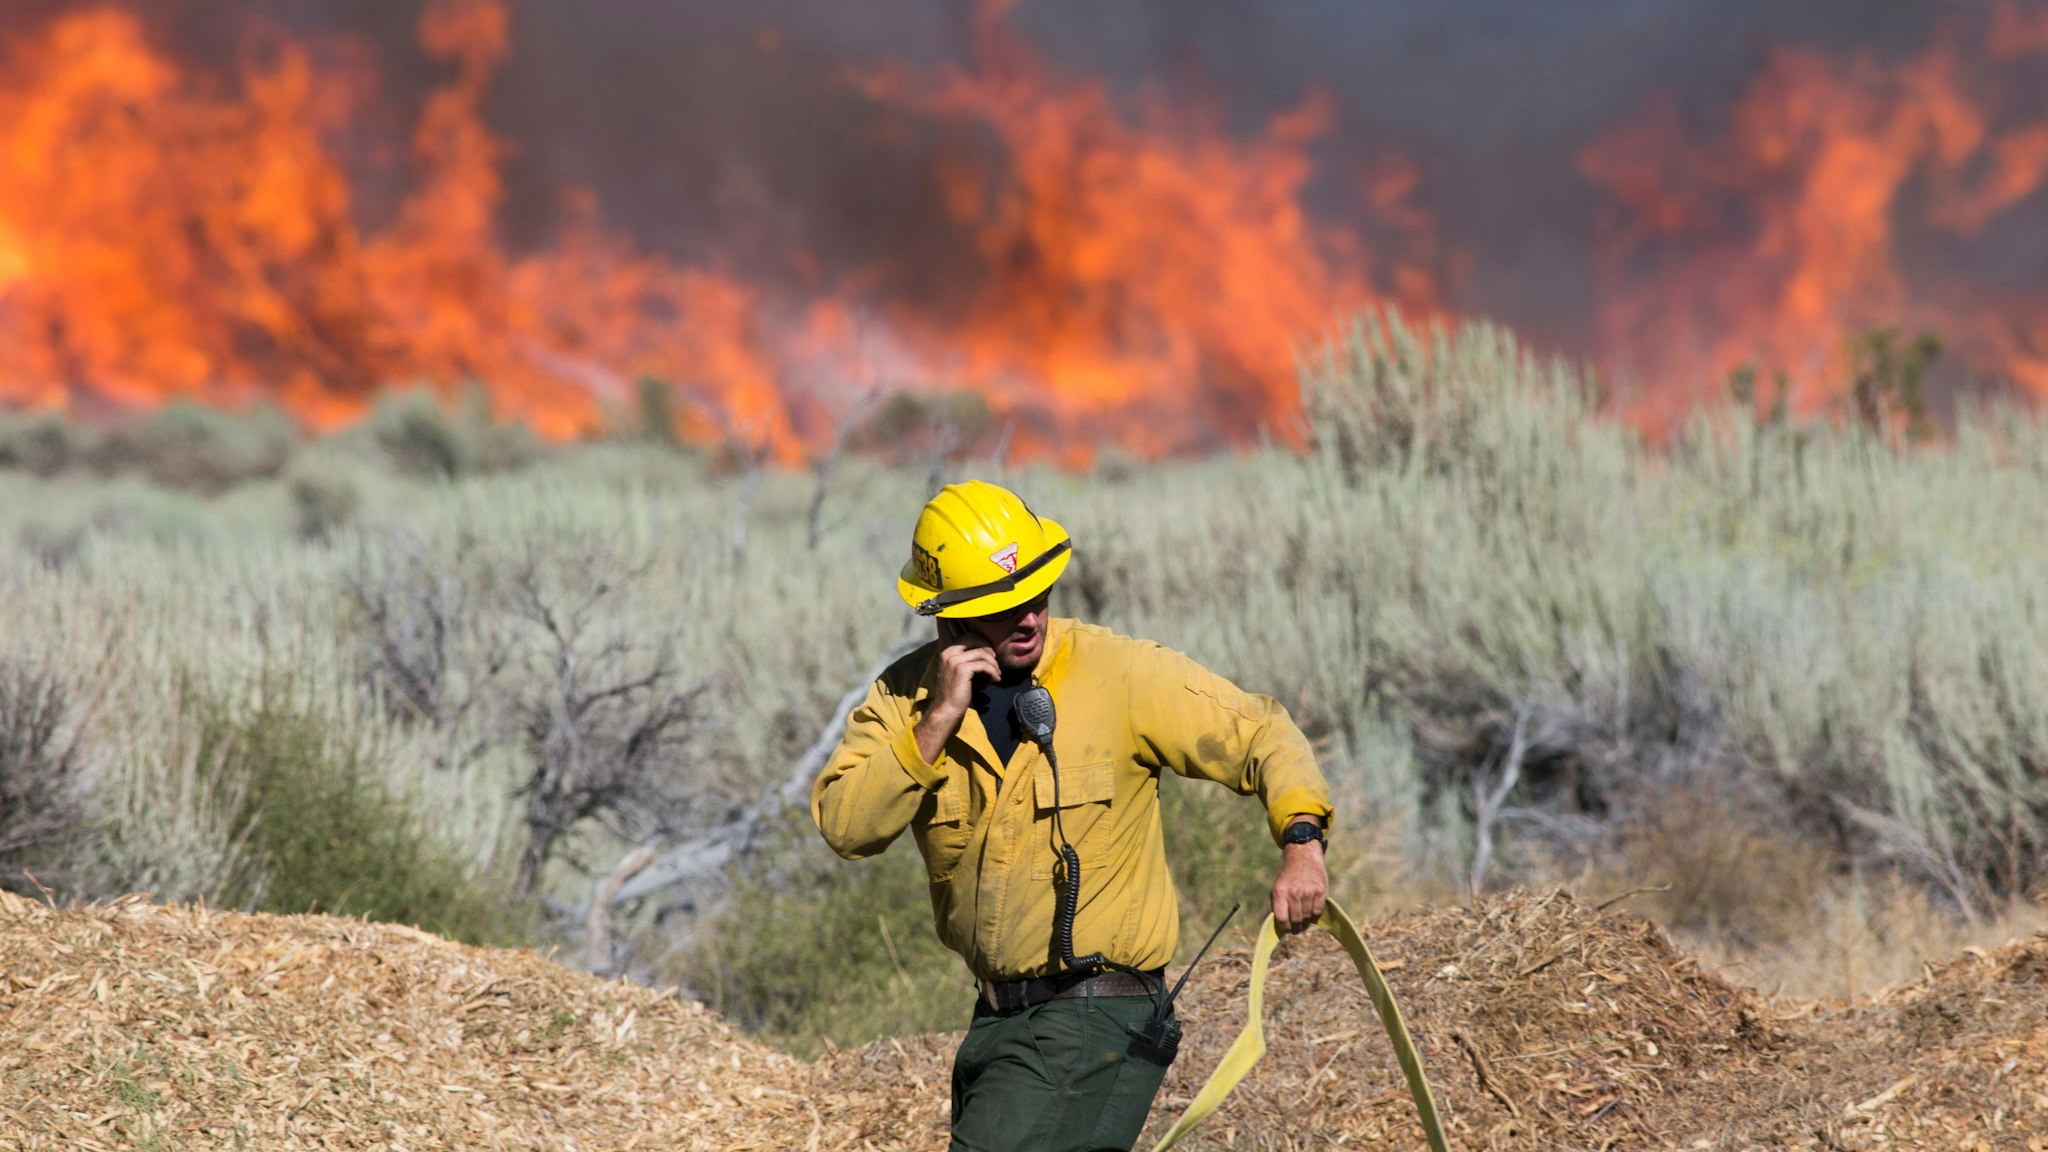 A firefighter maneuvers a hose at the Blue Cut wildfire in Wrightwood, California on August 17, 2016. A rapidly spreading fire raging east of Los Angeles forced the evacuation of more than 82,000 people as the governor of California declared a state of emergency. / AFP / JONATHAN ALCORN (Photo credit should read JONATHAN ALCORN/AFP via Getty Images)